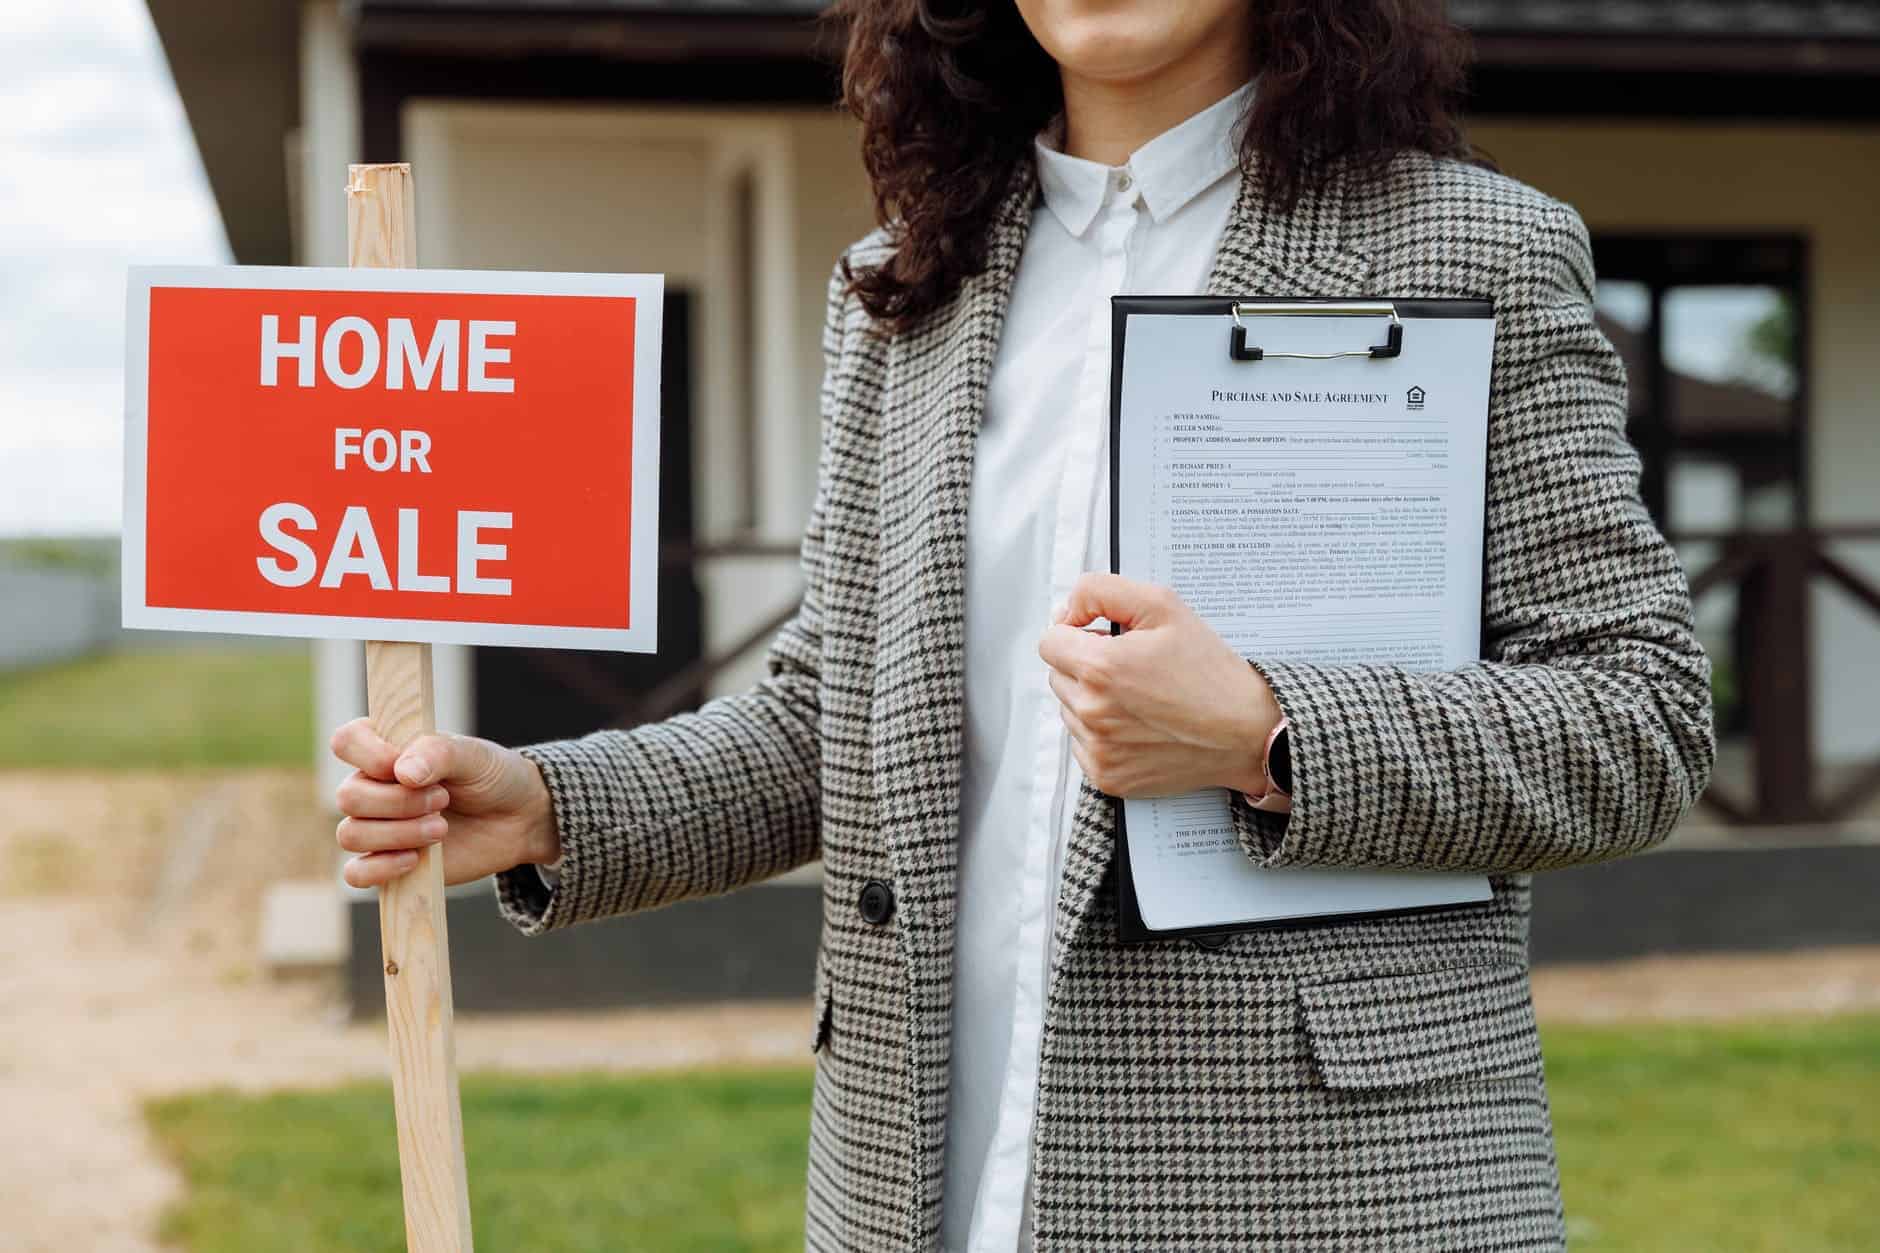 Lady in a suit holding a clipboard in left hand and a home fore sale sign in right hand